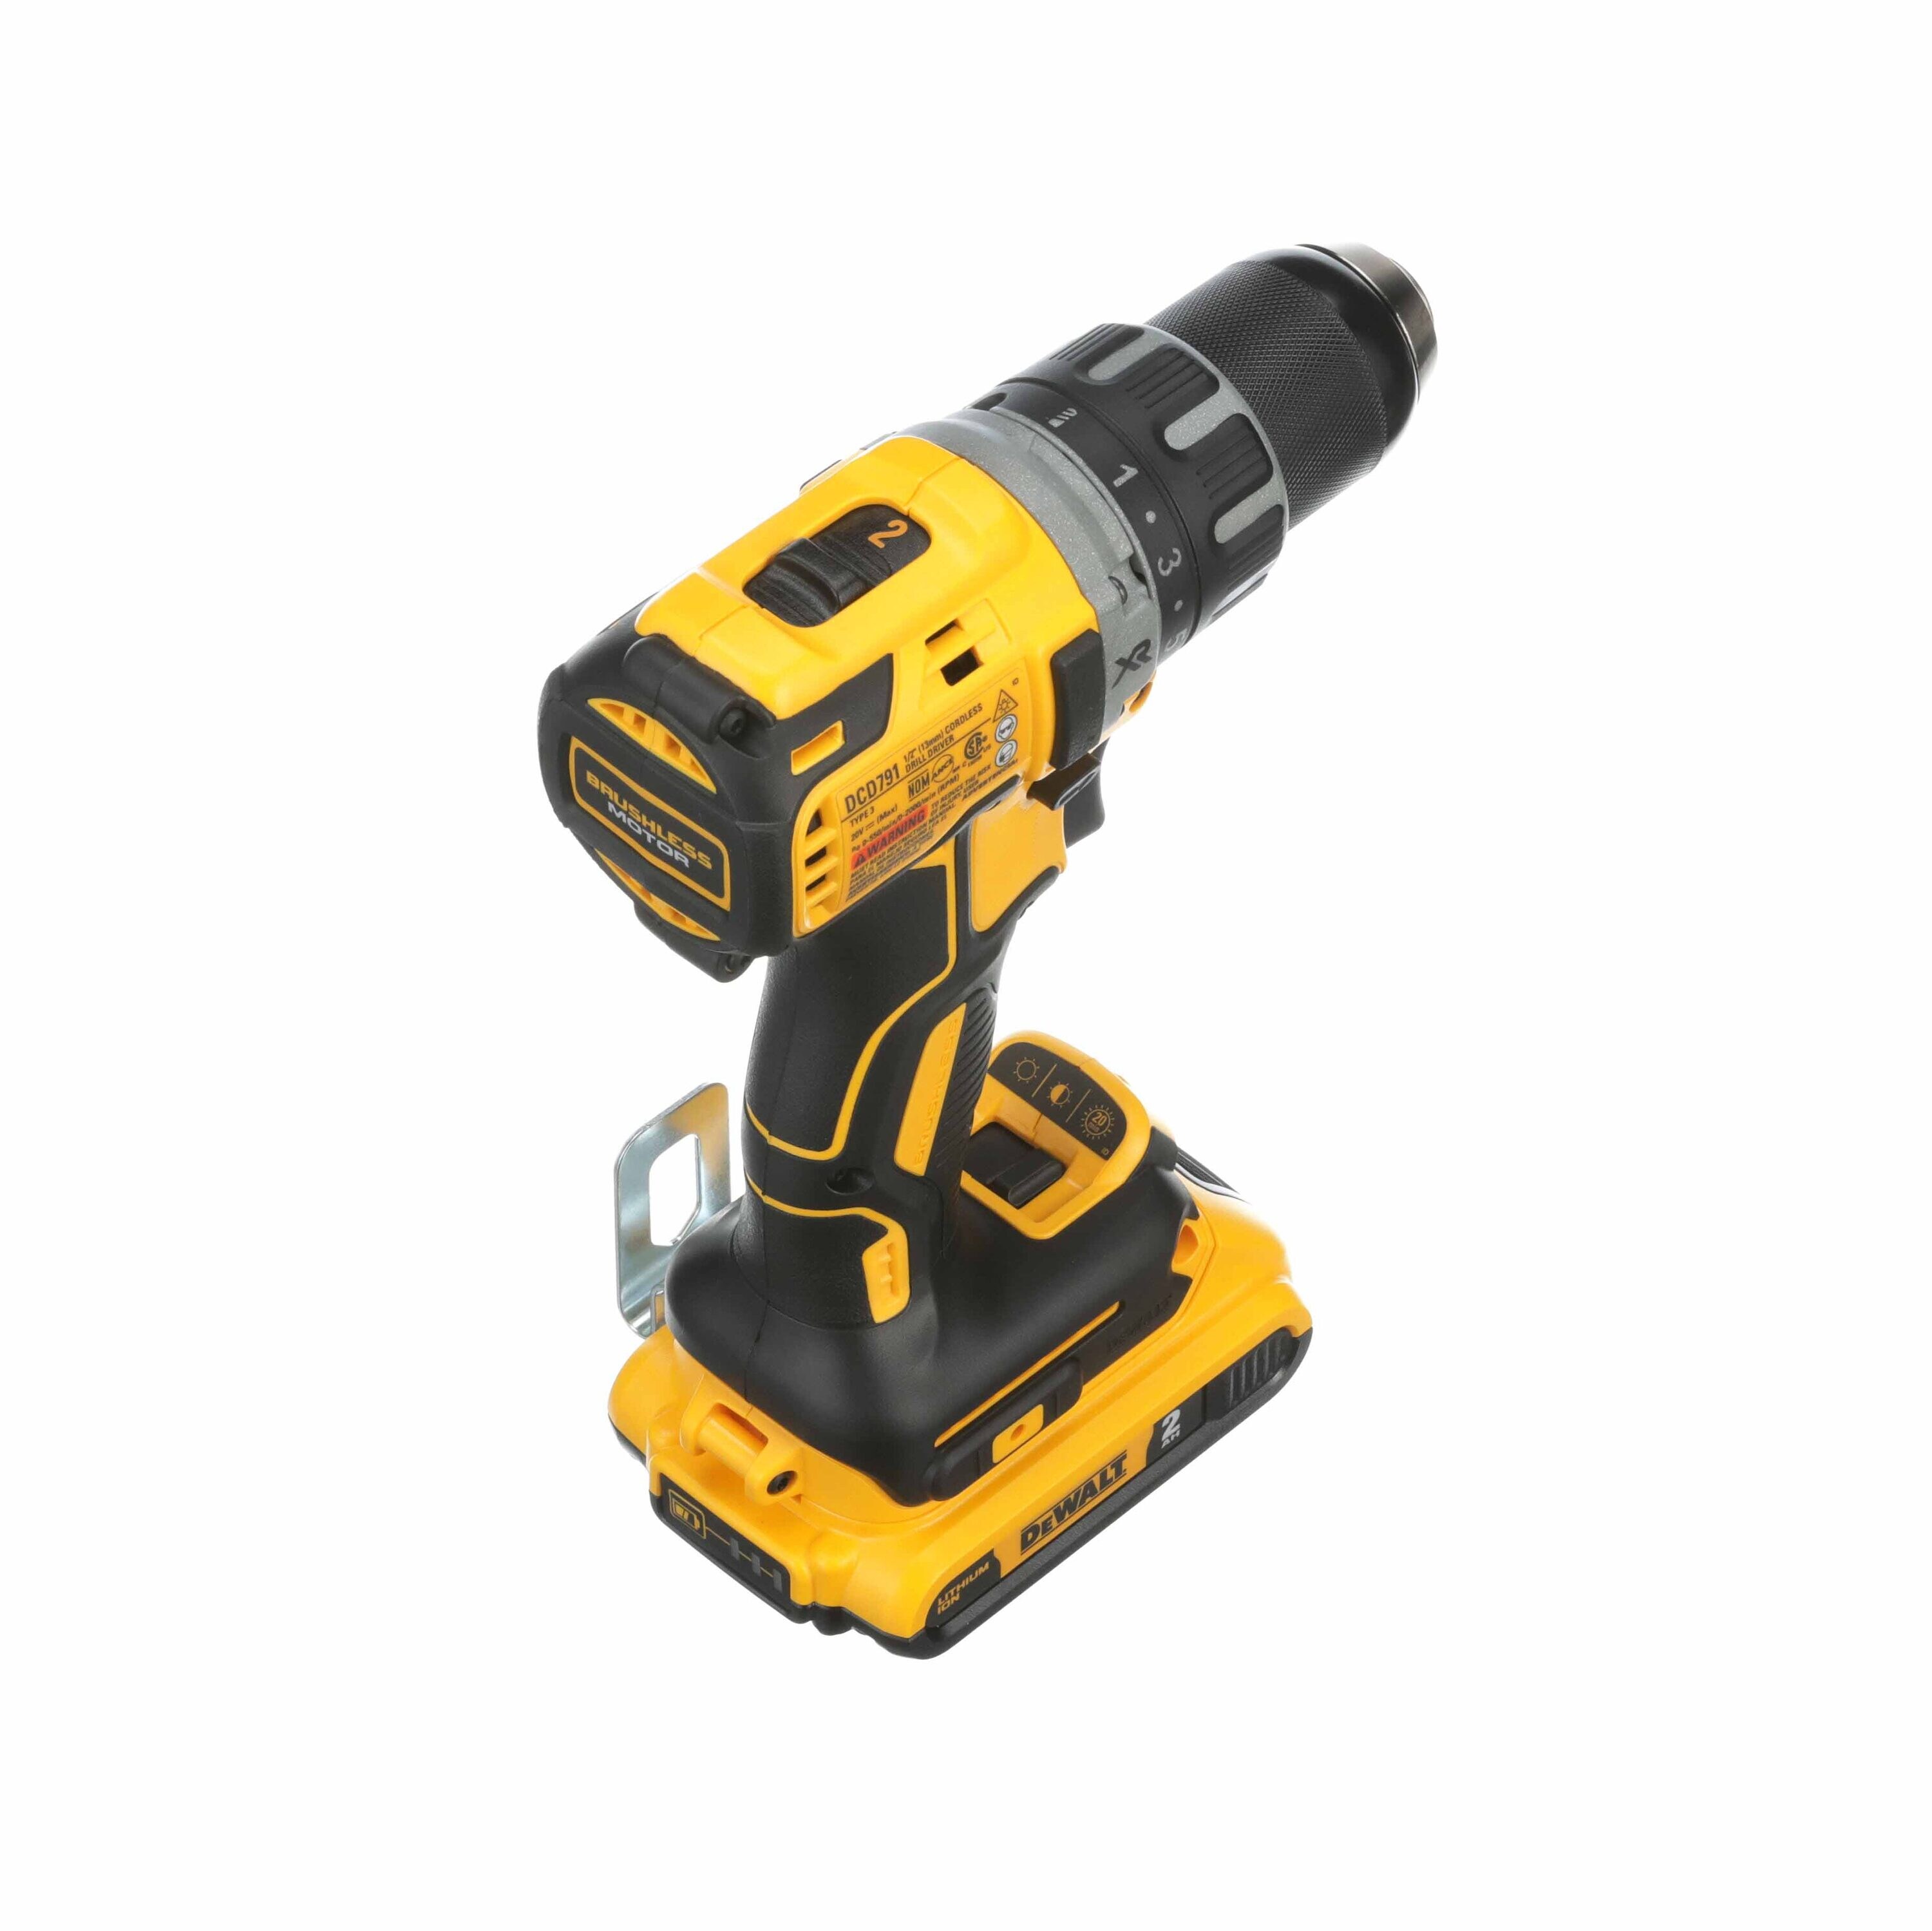 DEWALT XR 20-volt 1/2-in Drill (2 Li-ion Batteries Included and Charger Included) in department at Lowes.com